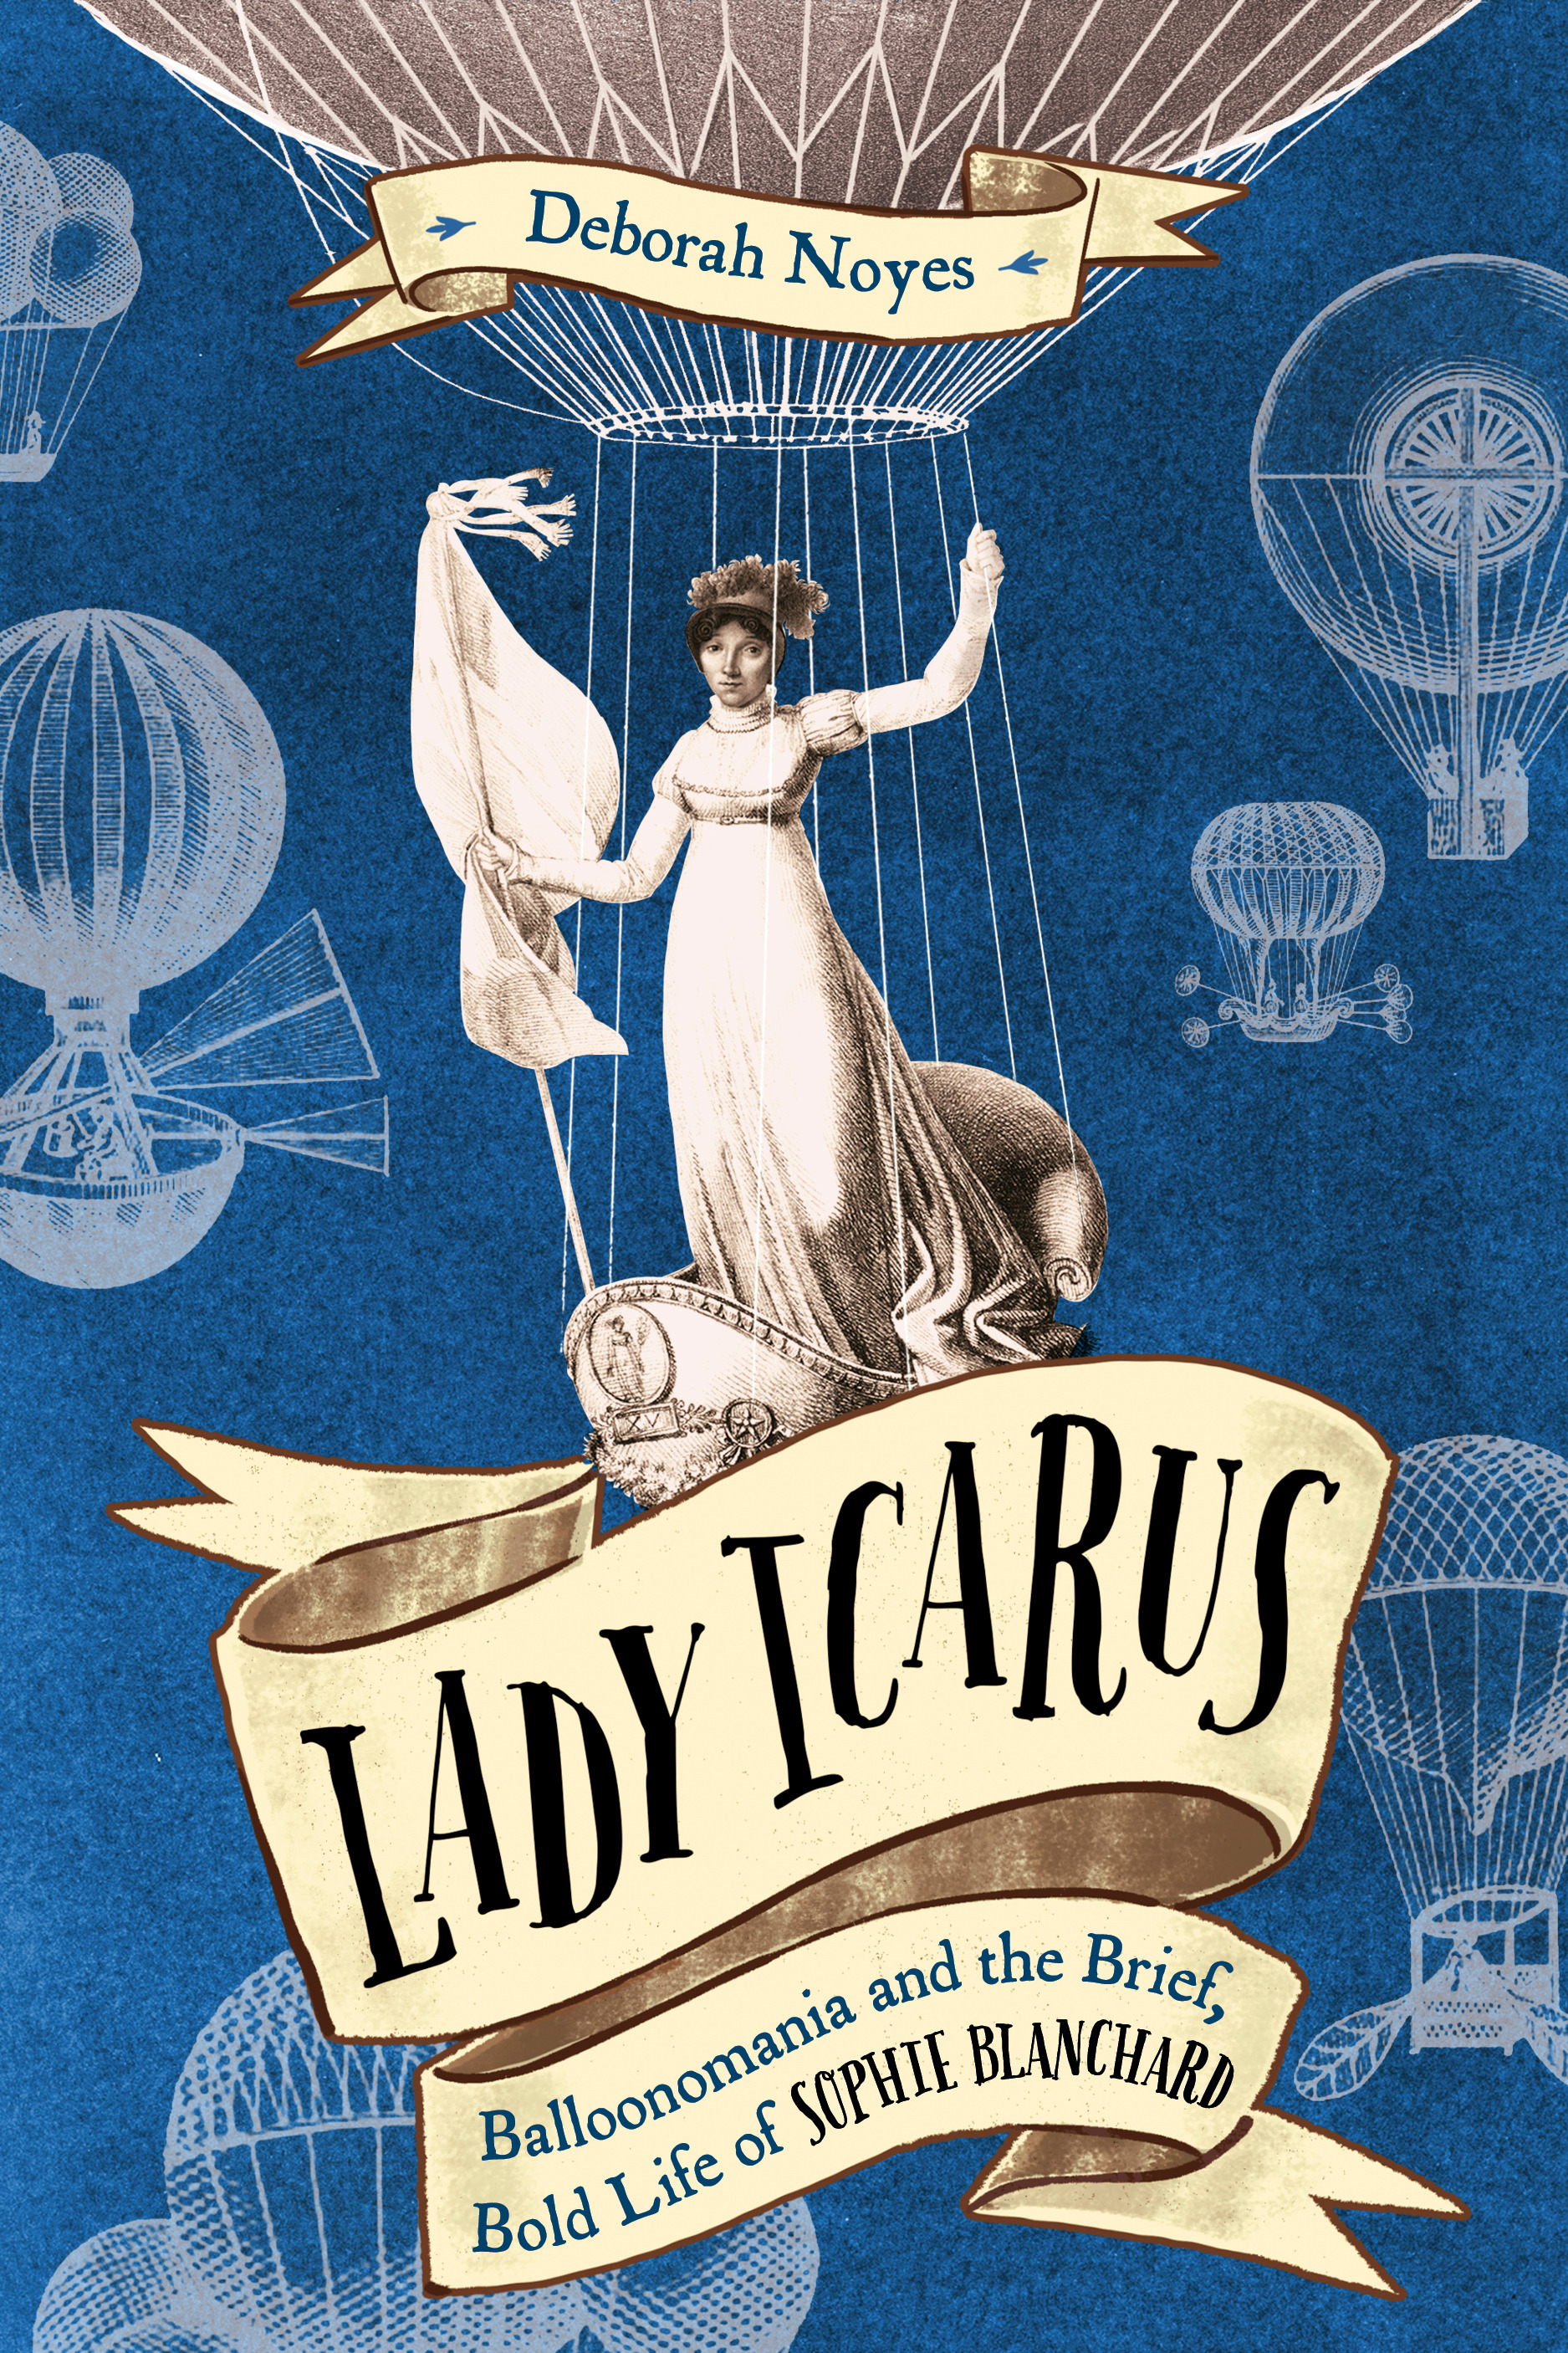 Lady Icarus: Balloonmania and the Brief, Bold Life of Sophie Blanchard | 9-12 years old